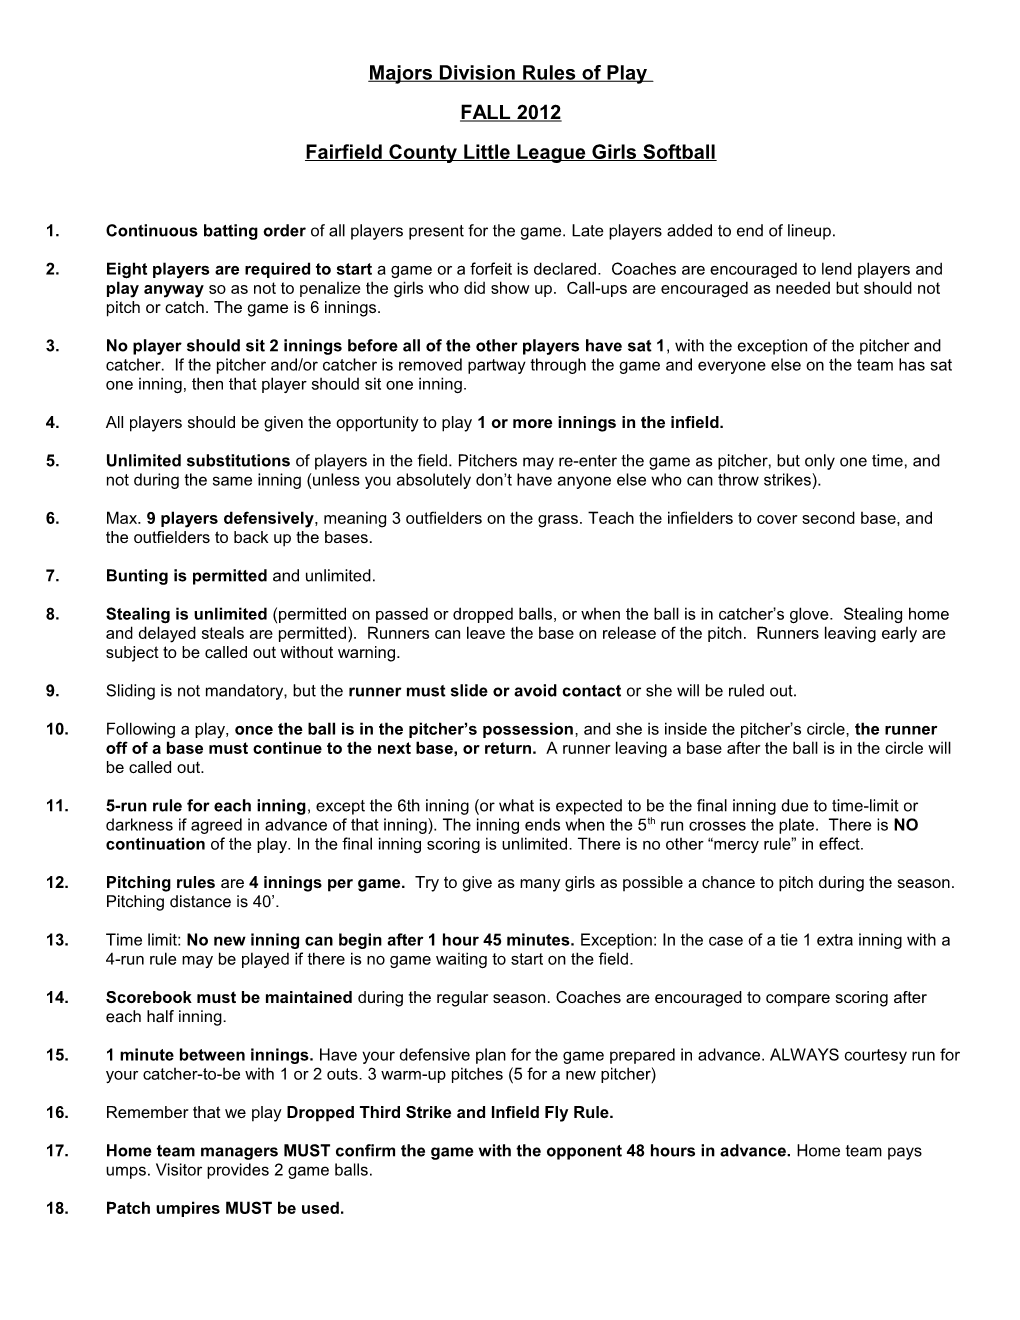 FLLGS AAA Division 2009 Rules of Play (4/5/09 Version)